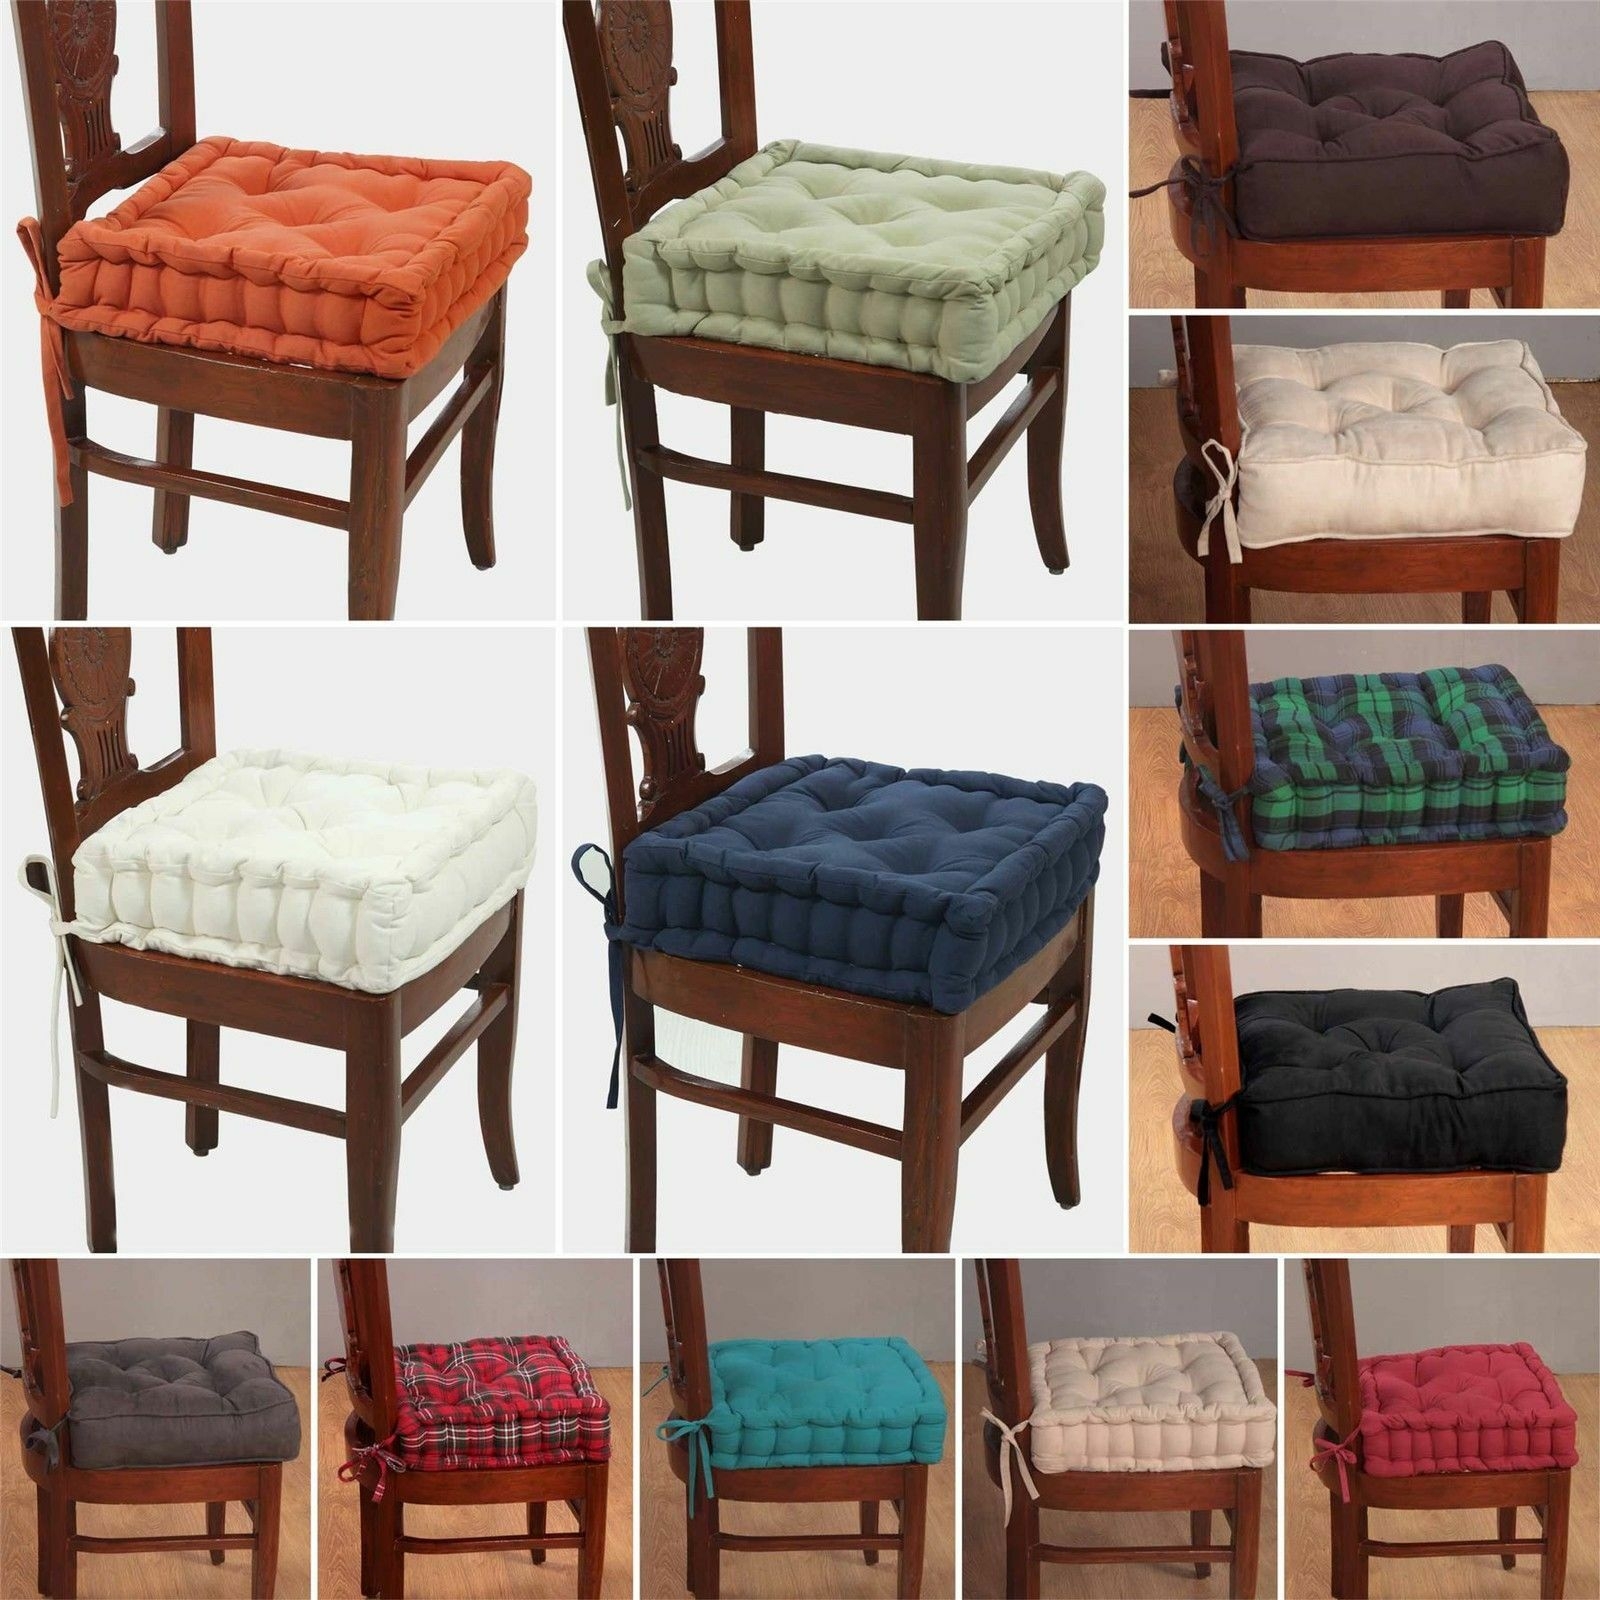 Chair Pads With Ties Visualhunt, Dining Room Chair Seat Cushions With Ties